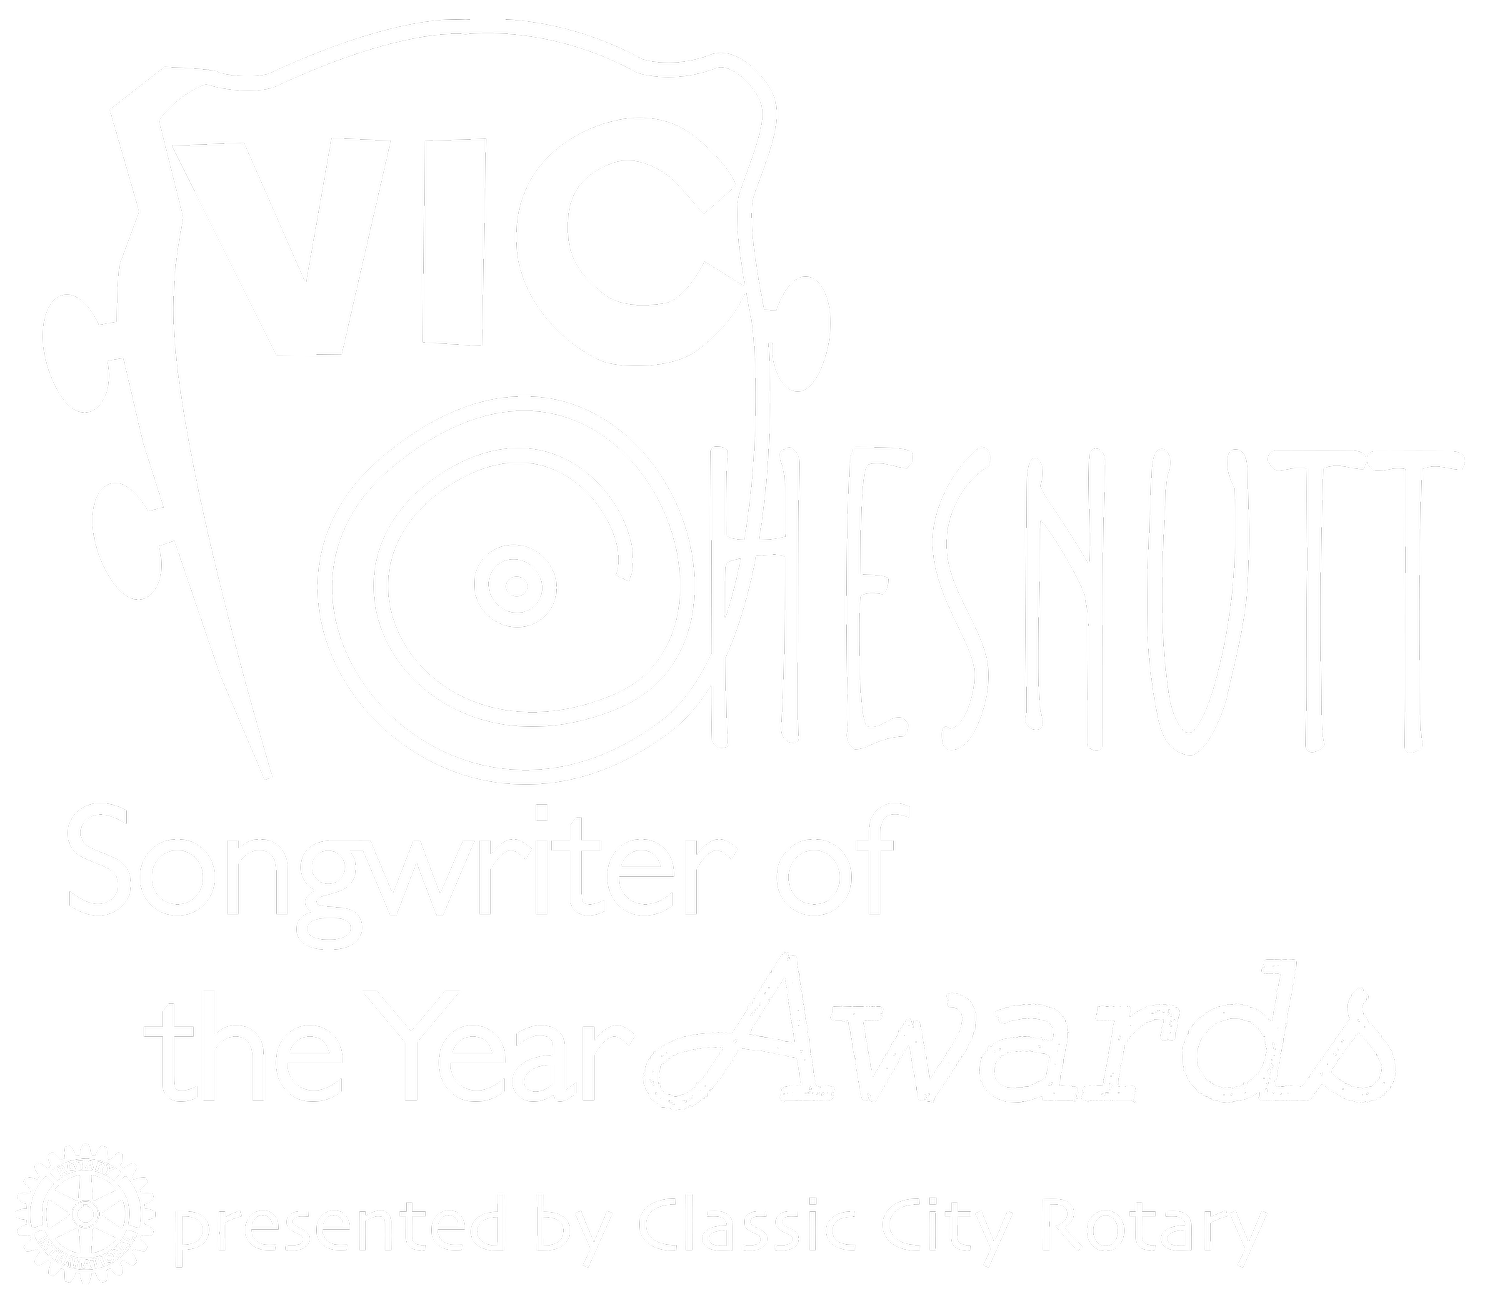 Vic Chesnutt Songwriter of the Year Award